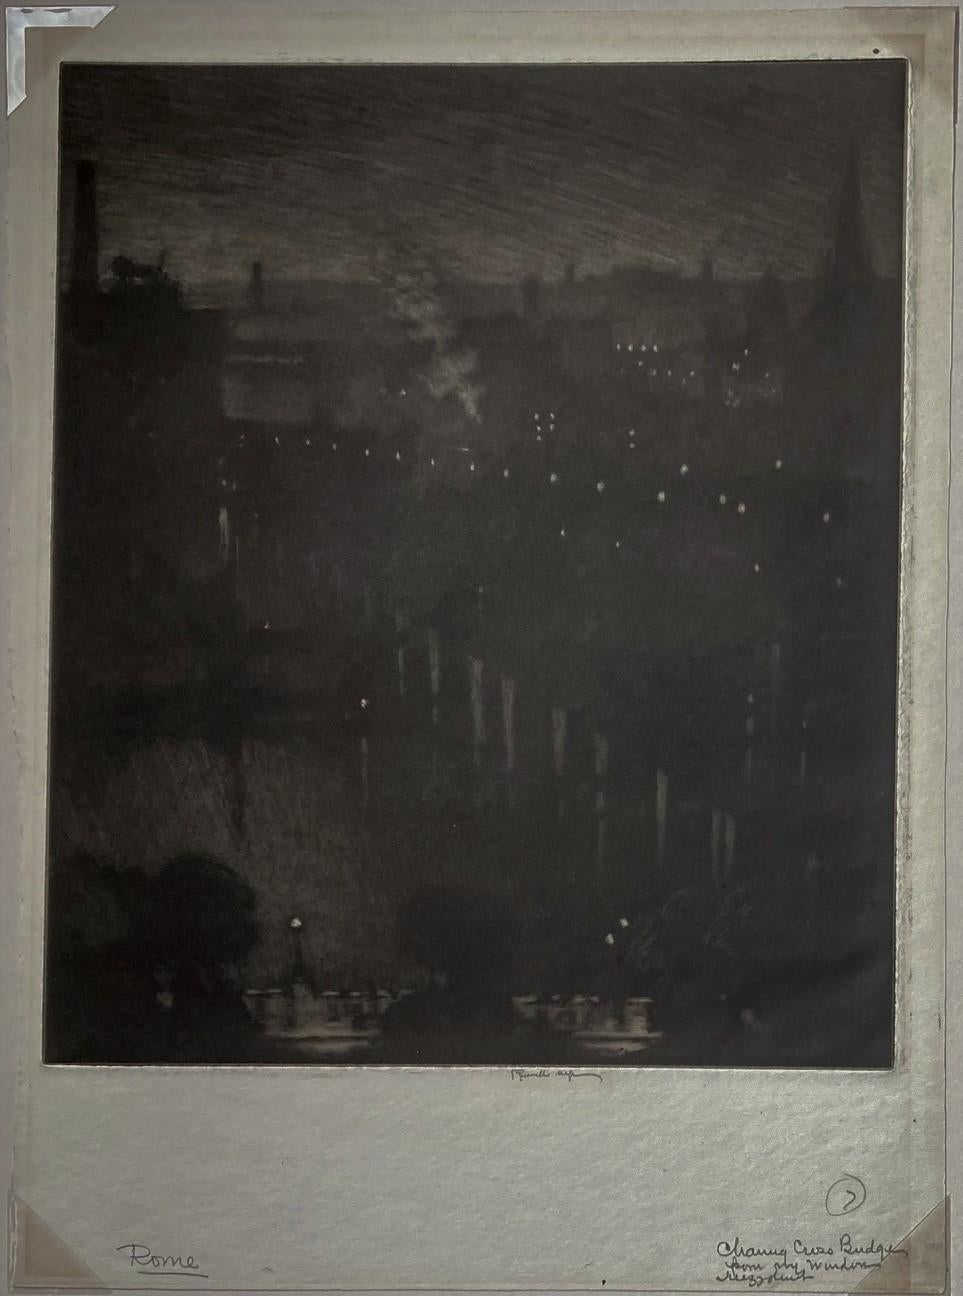 Charing Cross at Night. 1909. Mezzotint. Wuerth 510. 11 7/8 x 10 (sheet 15 x 10 3/4). Edition probably 30. Printed on 'Rome'cream laid paper, probably from an antique volume. Annotated 'Rome' [paper] and 'Charing Cross Bridge from my Window' by the